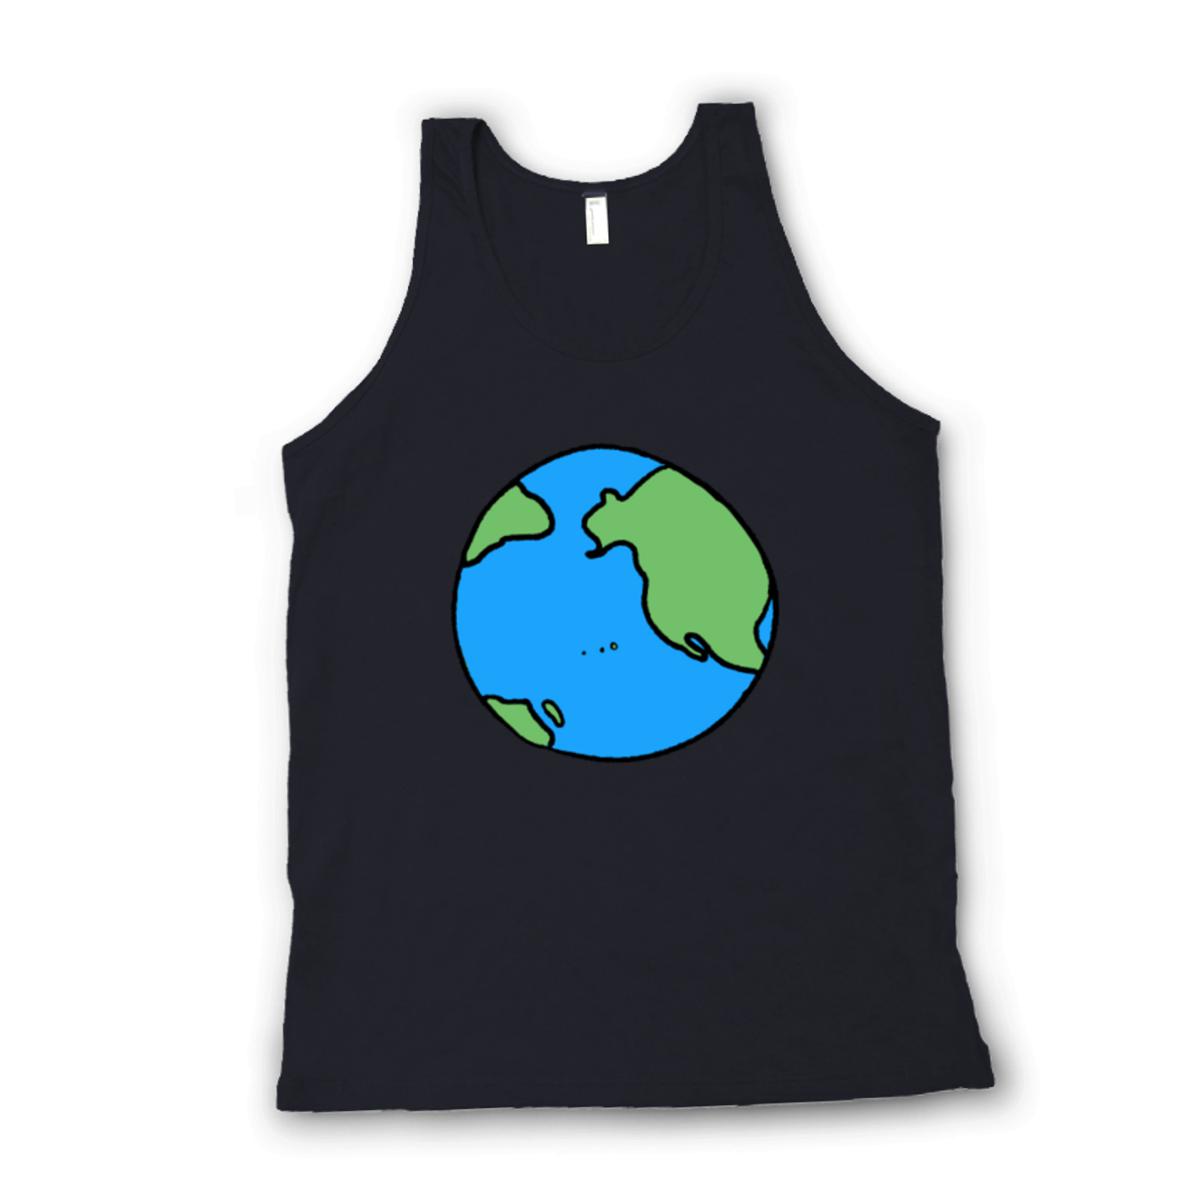 Earth Unisex Tank Top Double Extra Large black